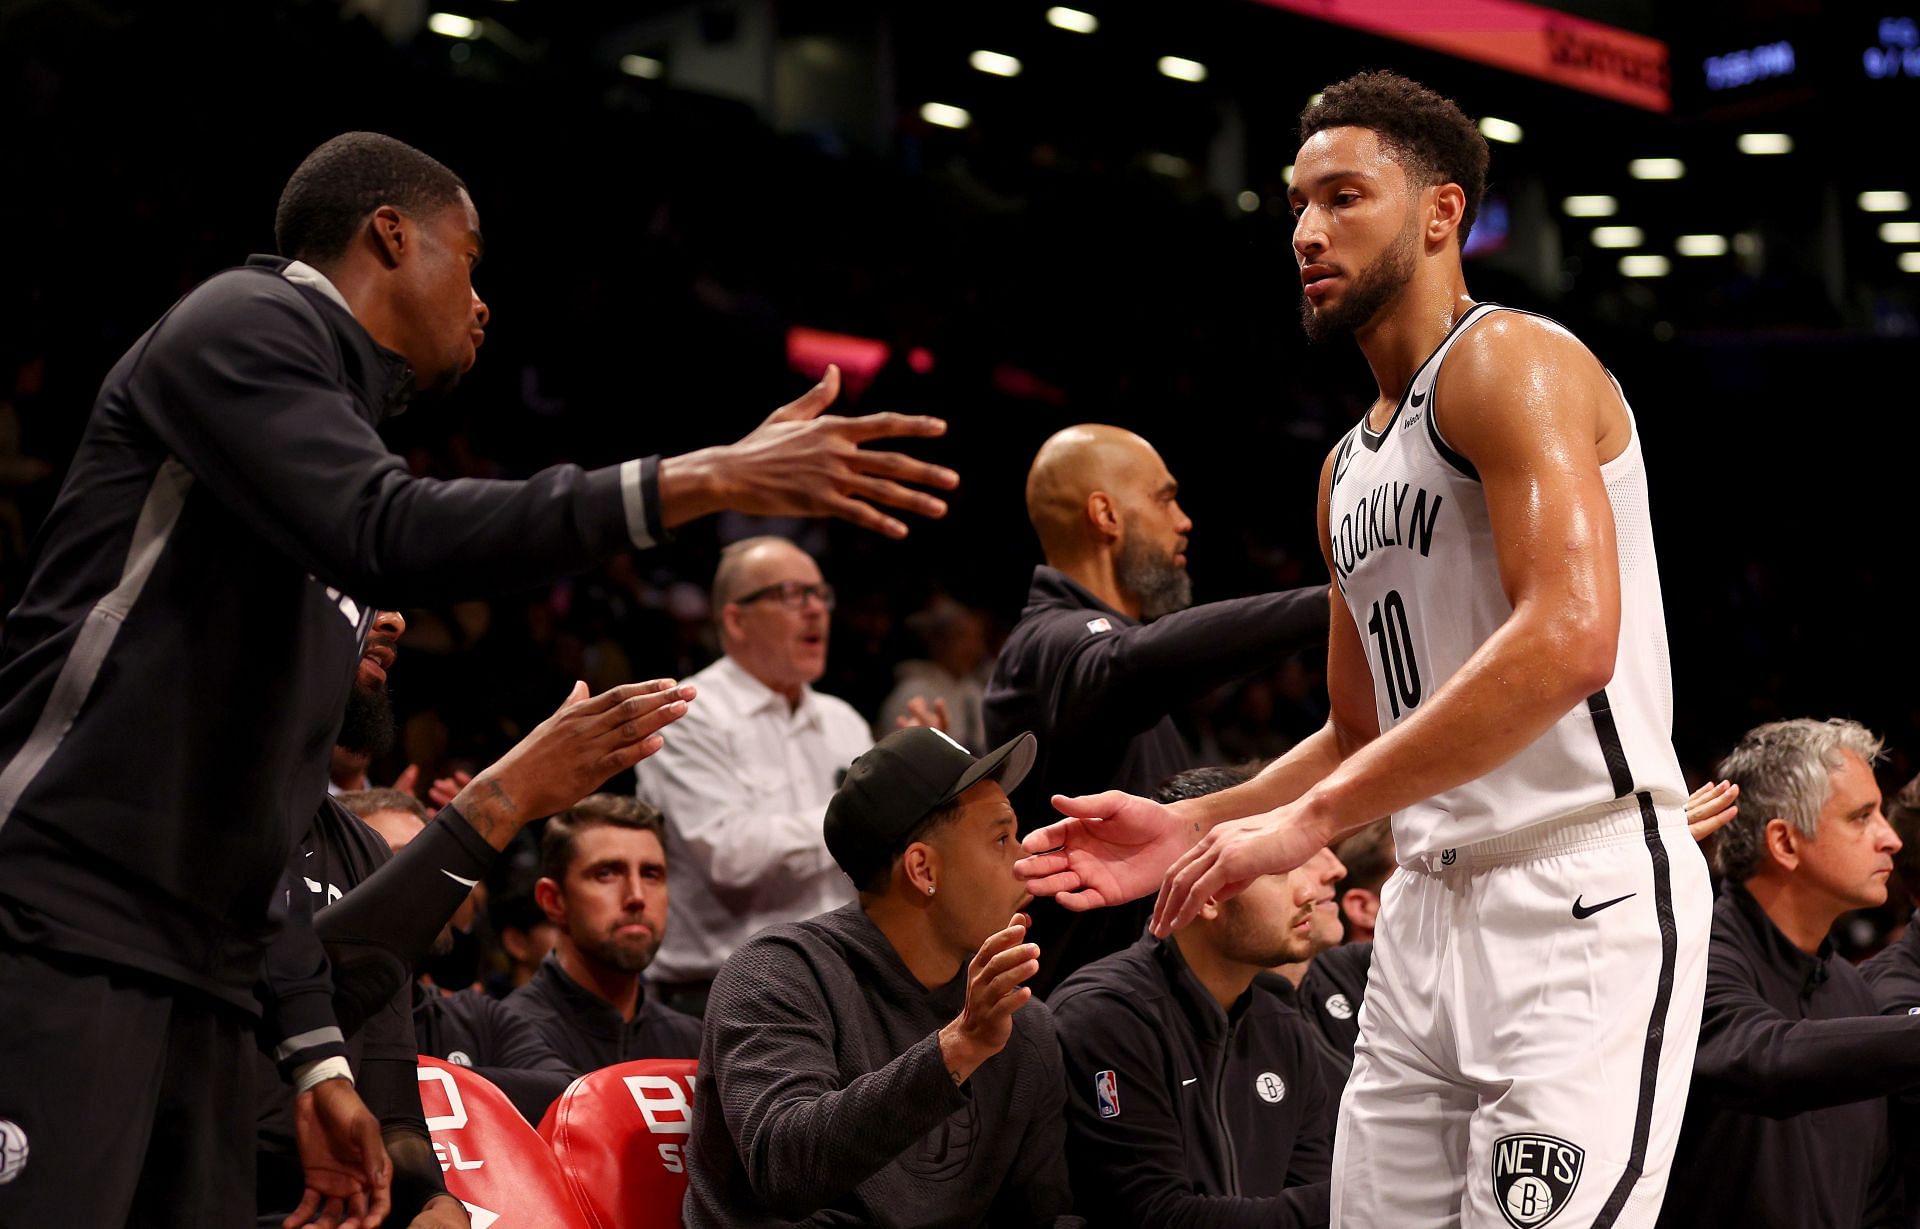 Ben Simmons is averaging several career-low numbers this season for the Brooklyn Nets.